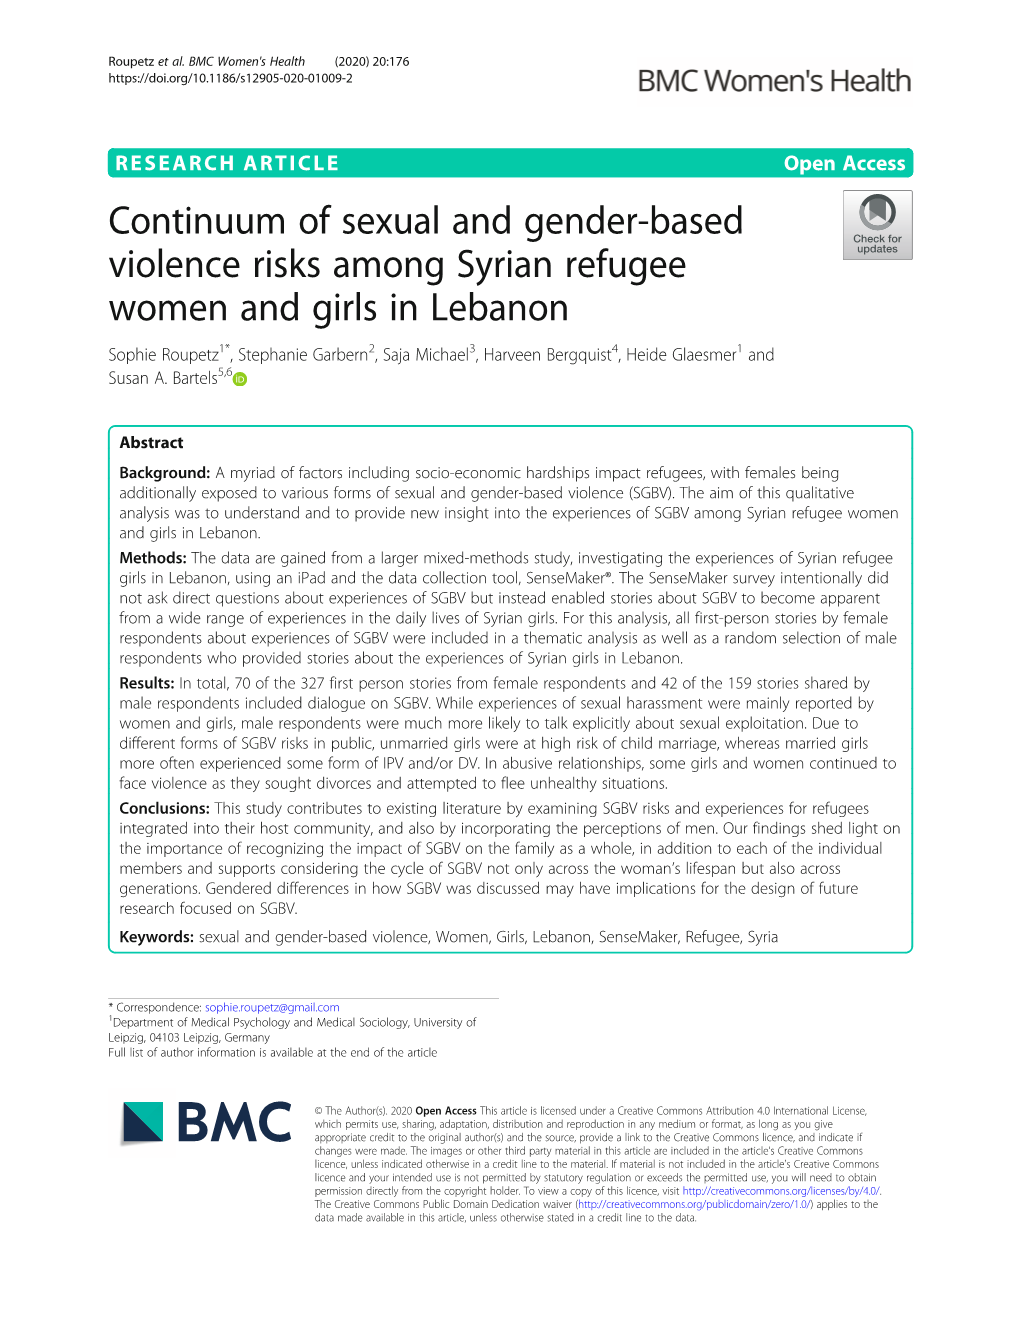 Continuum of Sexual and Gender-Based Violence Risks Among